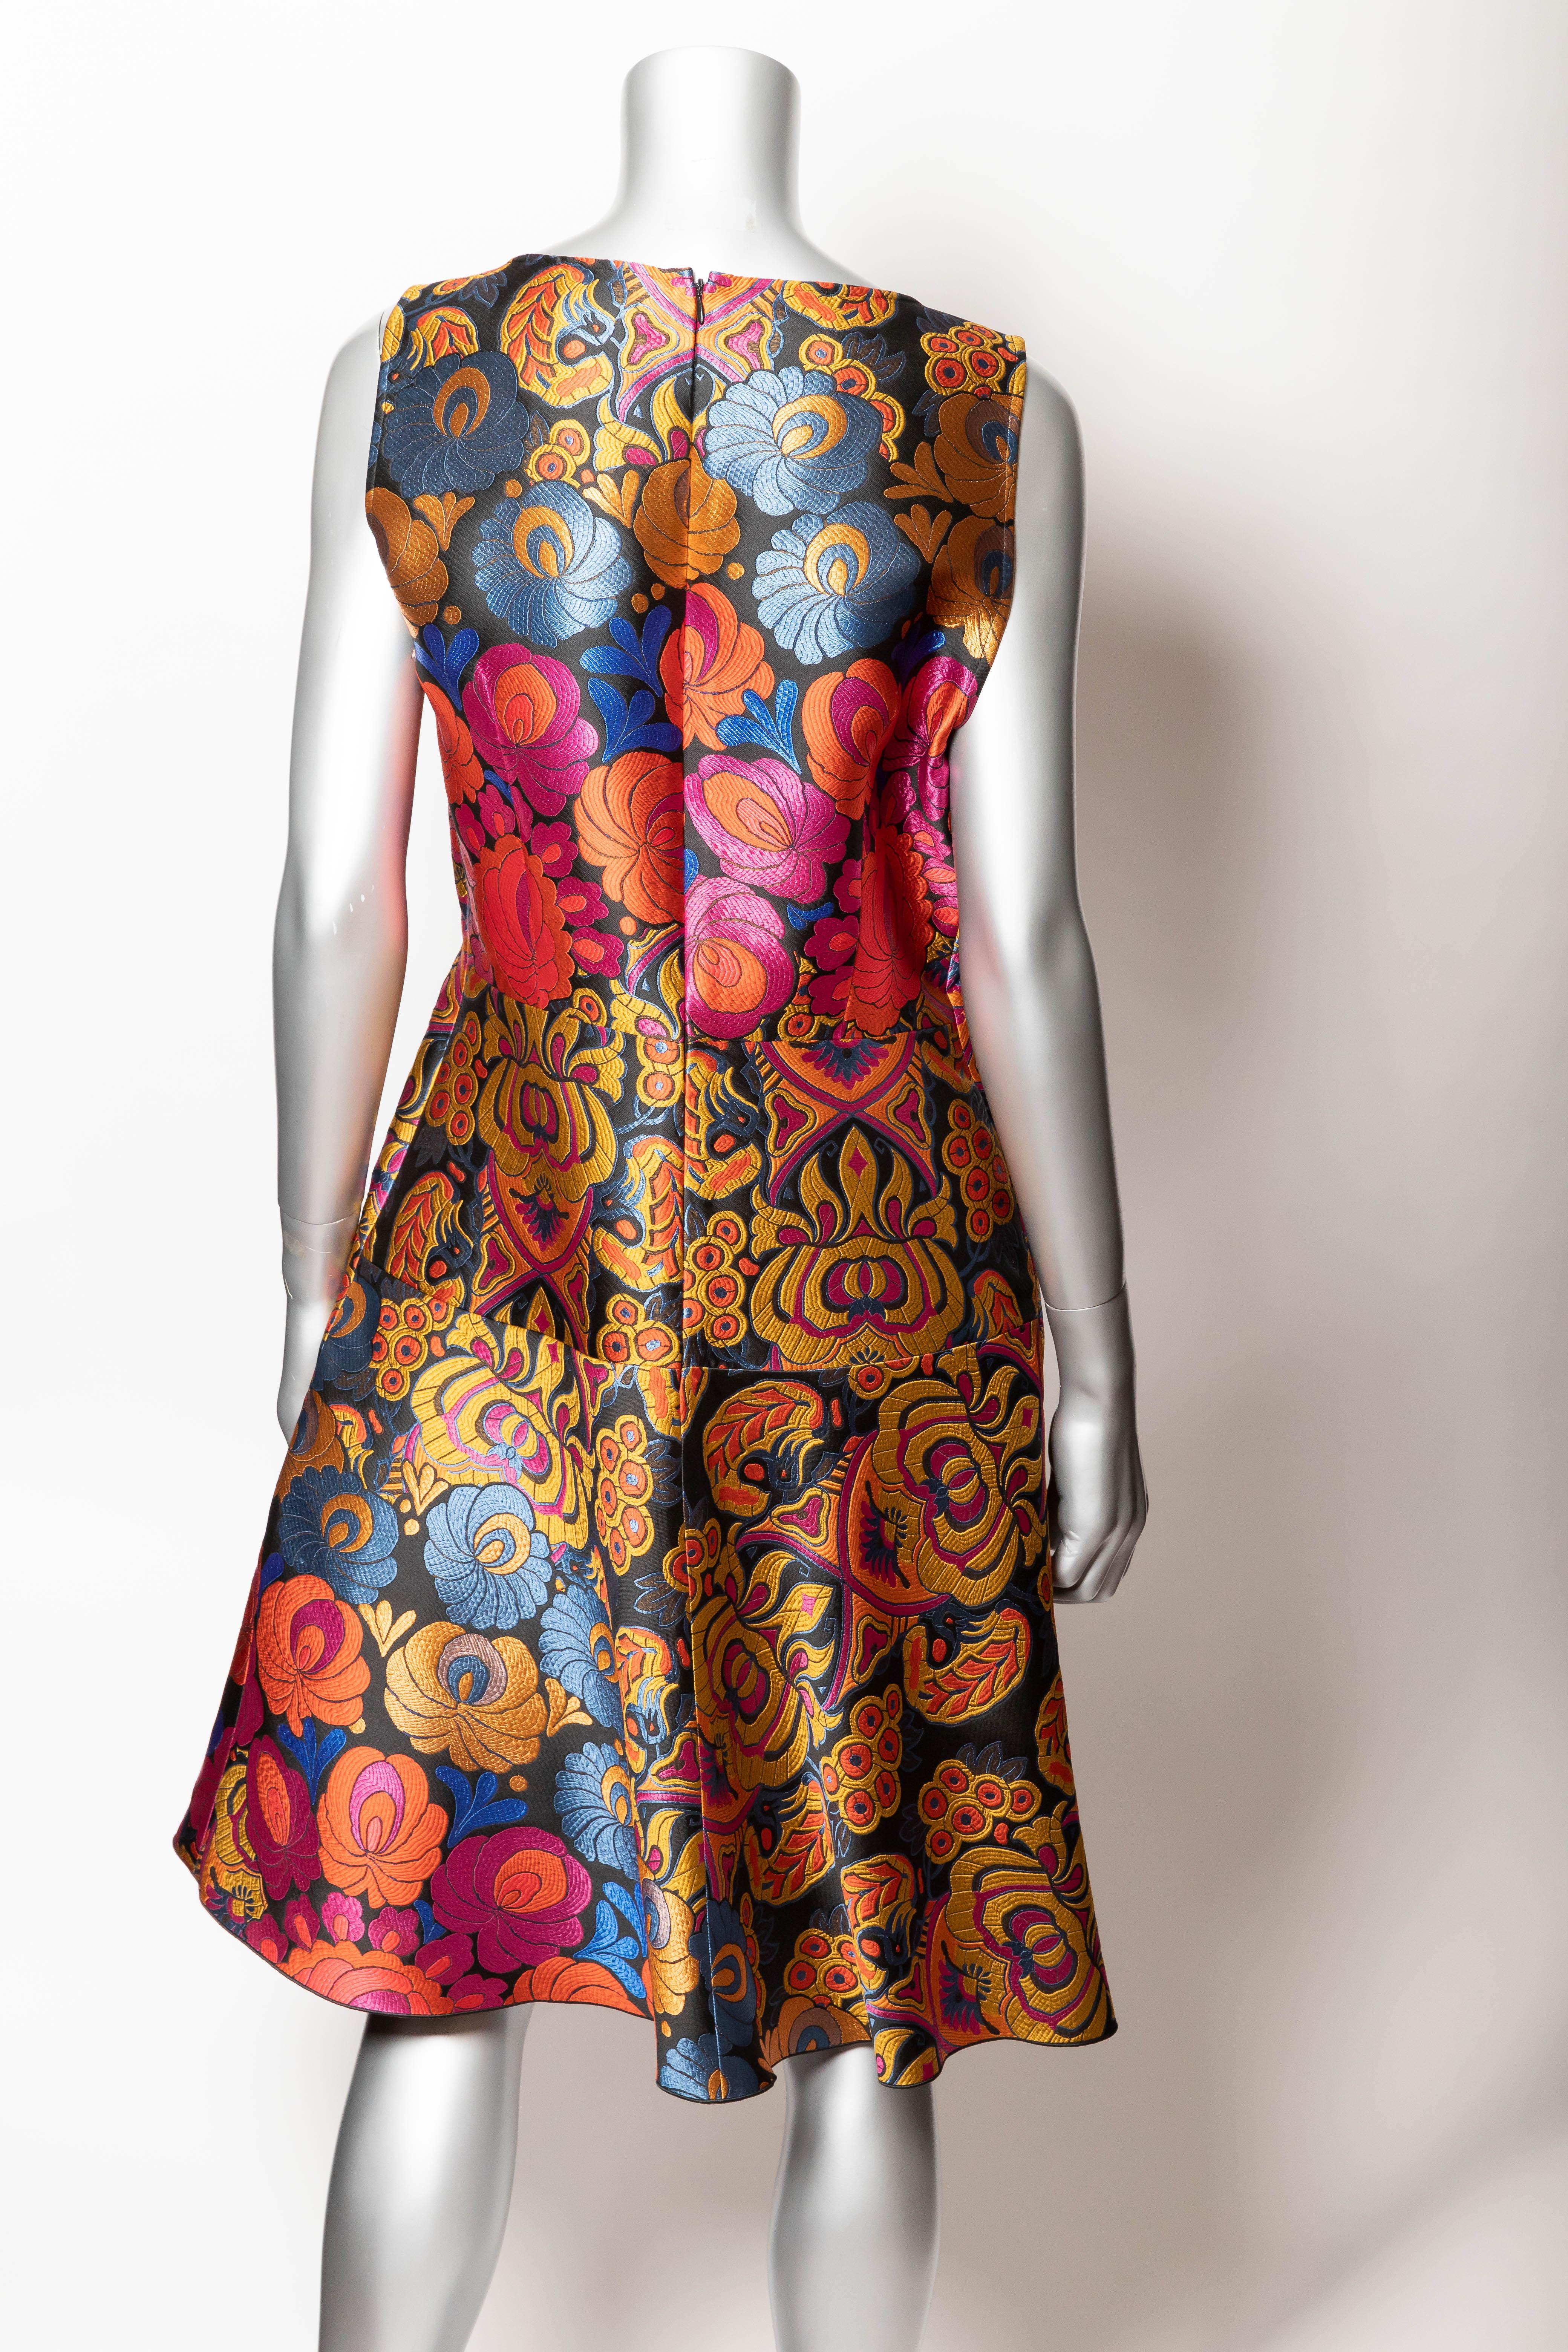 Beautiful Etro sleeveless dress in a size 46.
This dress has never been worn and original tags are still attached.
Original retail price of $1845.
